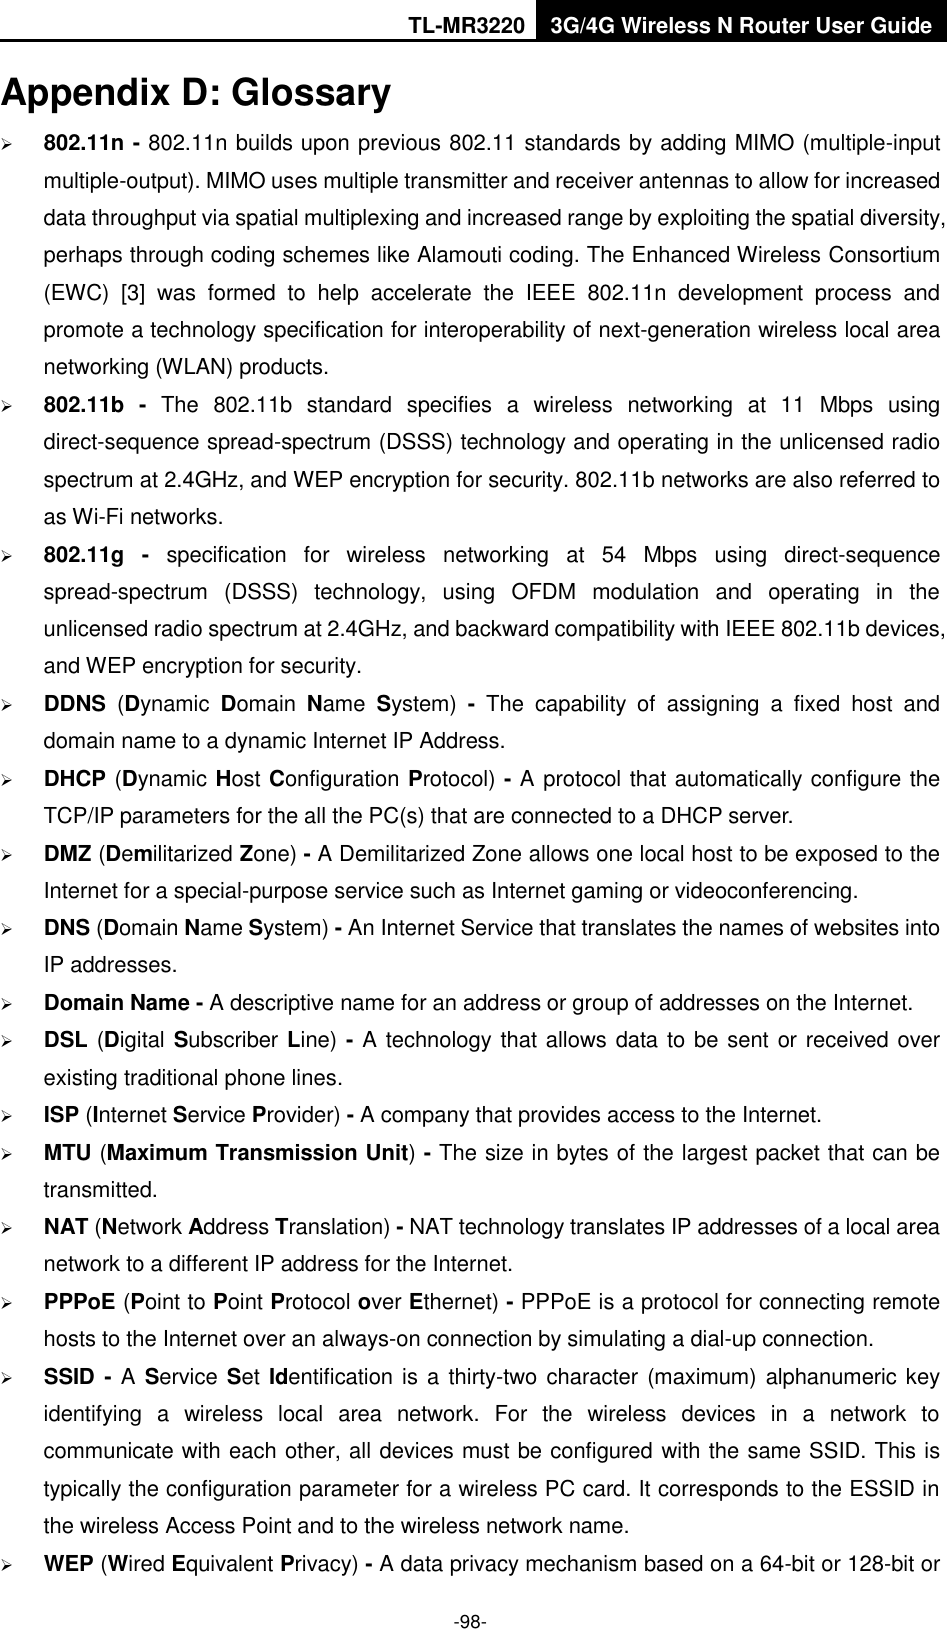 TL-MR3220 3G/4G Wireless N Router User Guide  -98- Appendix D: Glossary  802.11n - 802.11n builds upon previous 802.11 standards by adding MIMO (multiple-input multiple-output). MIMO uses multiple transmitter and receiver antennas to allow for increased data throughput via spatial multiplexing and increased range by exploiting the spatial diversity, perhaps through coding schemes like Alamouti coding. The Enhanced Wireless Consortium (EWC)  [3]  was  formed  to  help  accelerate  the  IEEE  802.11n  development  process  and promote a technology specification for interoperability of next-generation wireless local area networking (WLAN) products.  802.11b  -  The  802.11b  standard  specifies  a  wireless  networking  at  11  Mbps  using direct-sequence spread-spectrum (DSSS) technology and operating in the unlicensed radio spectrum at 2.4GHz, and WEP encryption for security. 802.11b networks are also referred to as Wi-Fi networks.  802.11g  -  specification  for  wireless  networking  at  54  Mbps  using  direct-sequence spread-spectrum  (DSSS)  technology,  using  OFDM  modulation  and  operating  in  the unlicensed radio spectrum at 2.4GHz, and backward compatibility with IEEE 802.11b devices, and WEP encryption for security.  DDNS  (Dynamic  Domain  Name  System) - The  capability  of  assigning  a  fixed  host  and domain name to a dynamic Internet IP Address.    DHCP (Dynamic Host Configuration Protocol) - A protocol that automatically configure the TCP/IP parameters for the all the PC(s) that are connected to a DHCP server.  DMZ (Demilitarized Zone) - A Demilitarized Zone allows one local host to be exposed to the Internet for a special-purpose service such as Internet gaming or videoconferencing.  DNS (Domain Name System) - An Internet Service that translates the names of websites into IP addresses.  Domain Name - A descriptive name for an address or group of addresses on the Internet.    DSL (Digital Subscriber Line) - A technology that allows data to be sent or received over existing traditional phone lines.  ISP (Internet Service Provider) - A company that provides access to the Internet.  MTU (Maximum Transmission Unit) - The size in bytes of the largest packet that can be transmitted.  NAT (Network Address Translation) - NAT technology translates IP addresses of a local area network to a different IP address for the Internet.  PPPoE (Point to Point Protocol over Ethernet) - PPPoE is a protocol for connecting remote hosts to the Internet over an always-on connection by simulating a dial-up connection.  SSID - A Service Set Identification is a thirty-two character  (maximum) alphanumeric key identifying  a  wireless  local  area  network.  For  the  wireless  devices  in  a  network  to communicate with each other, all devices must be configured with the same SSID. This is typically the configuration parameter for a wireless PC card. It corresponds to the ESSID in the wireless Access Point and to the wireless network name.    WEP (Wired Equivalent Privacy) - A data privacy mechanism based on a 64-bit or 128-bit or 